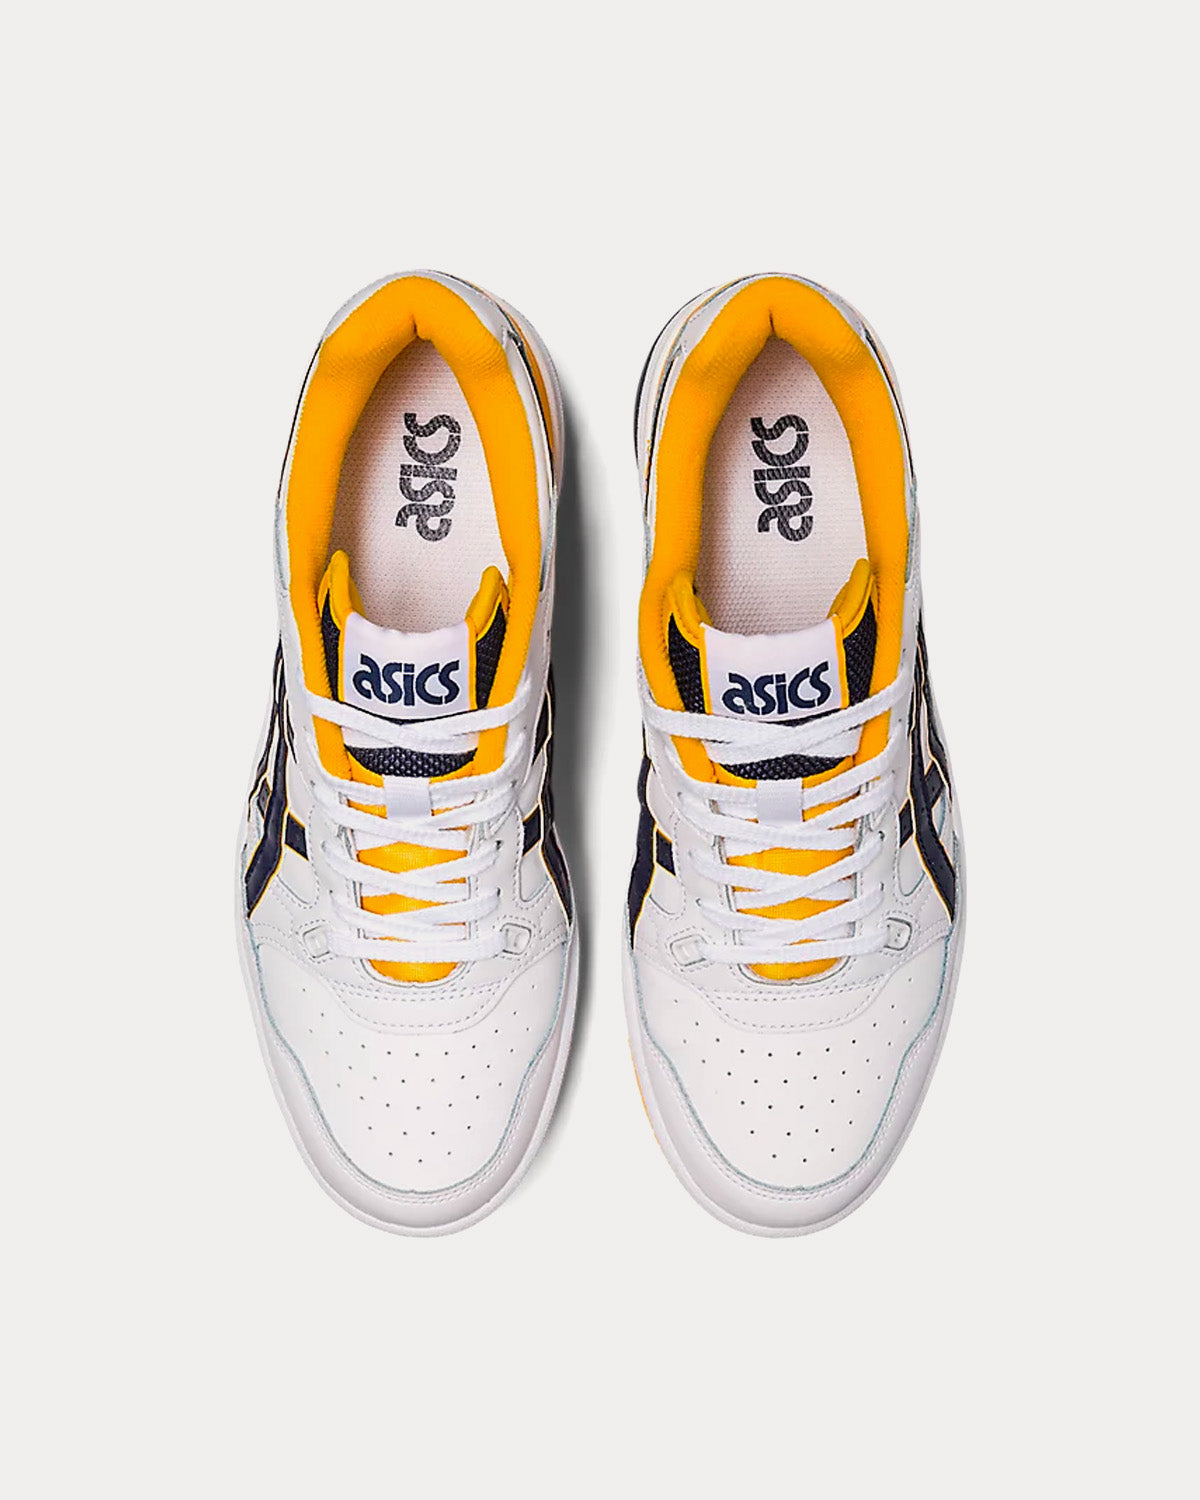 Asics EX89 White / Midnight / Yellow Low Top Sneakers - Sneak in Peace